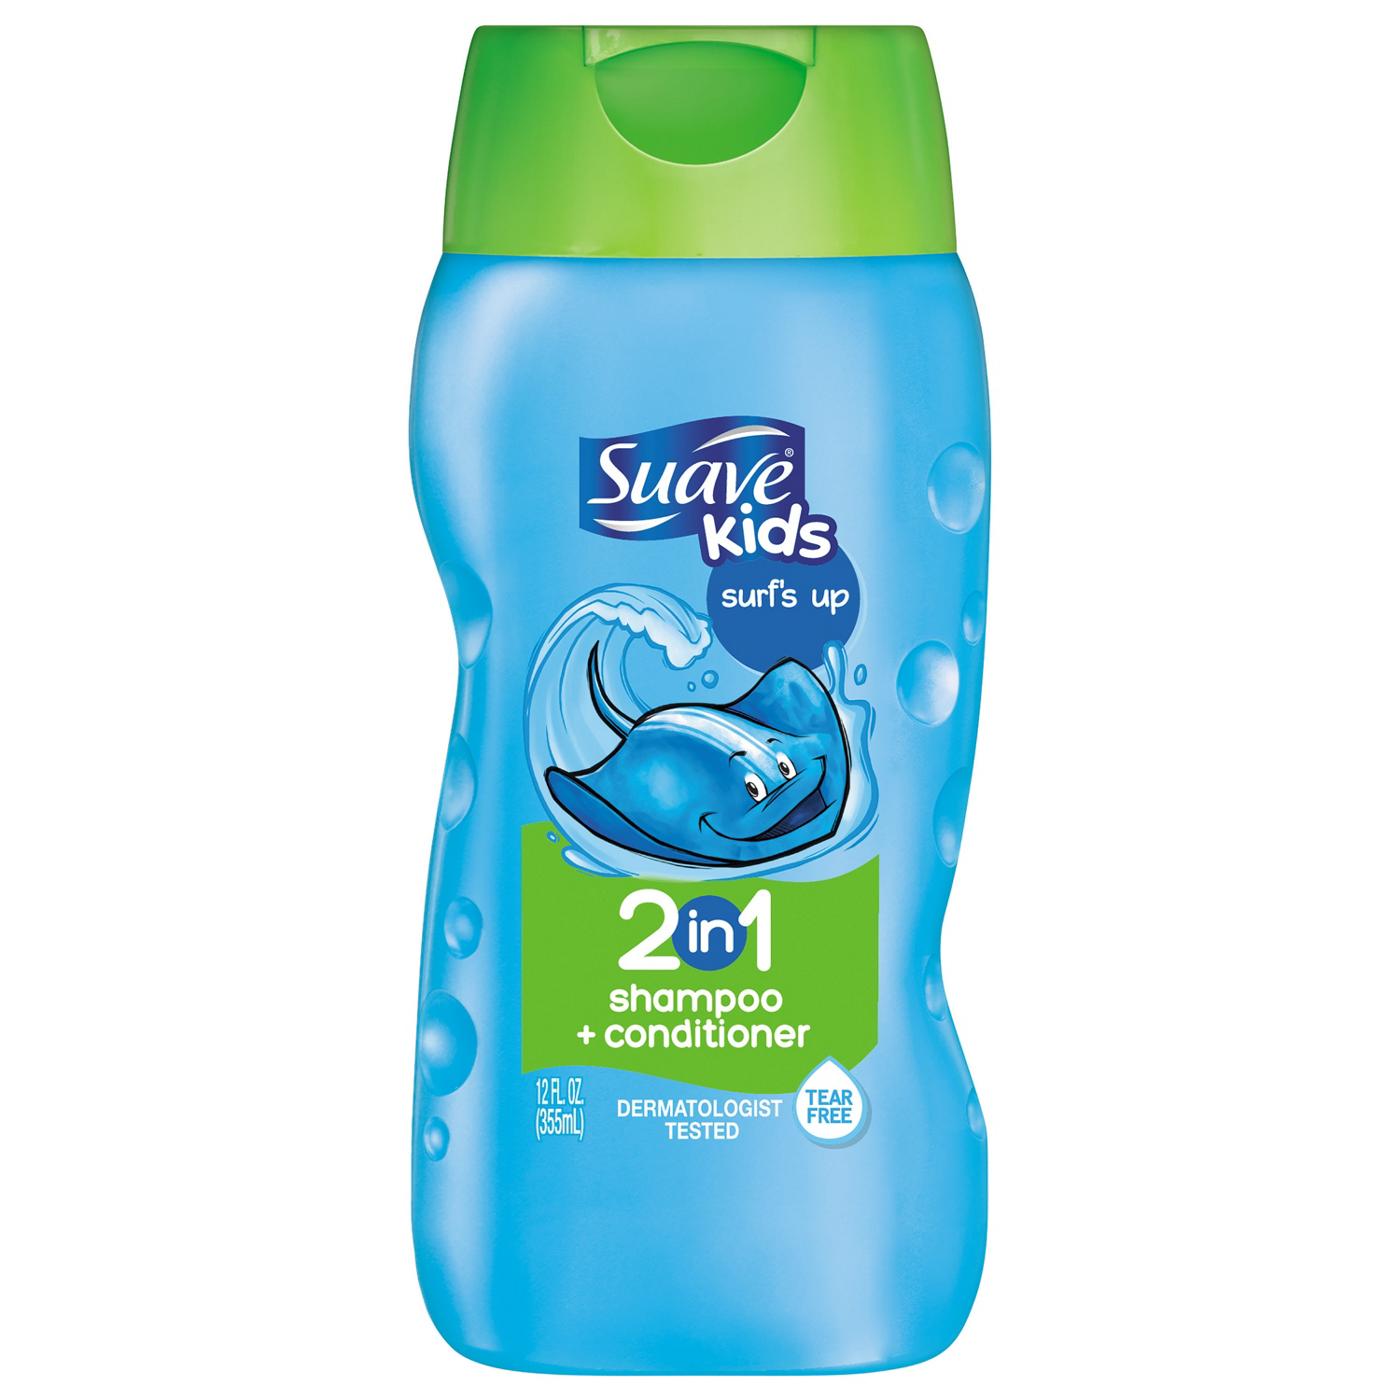 Suave Kids Surf's Up 2 in 1 Shampoo and Conditioner; image 1 of 3